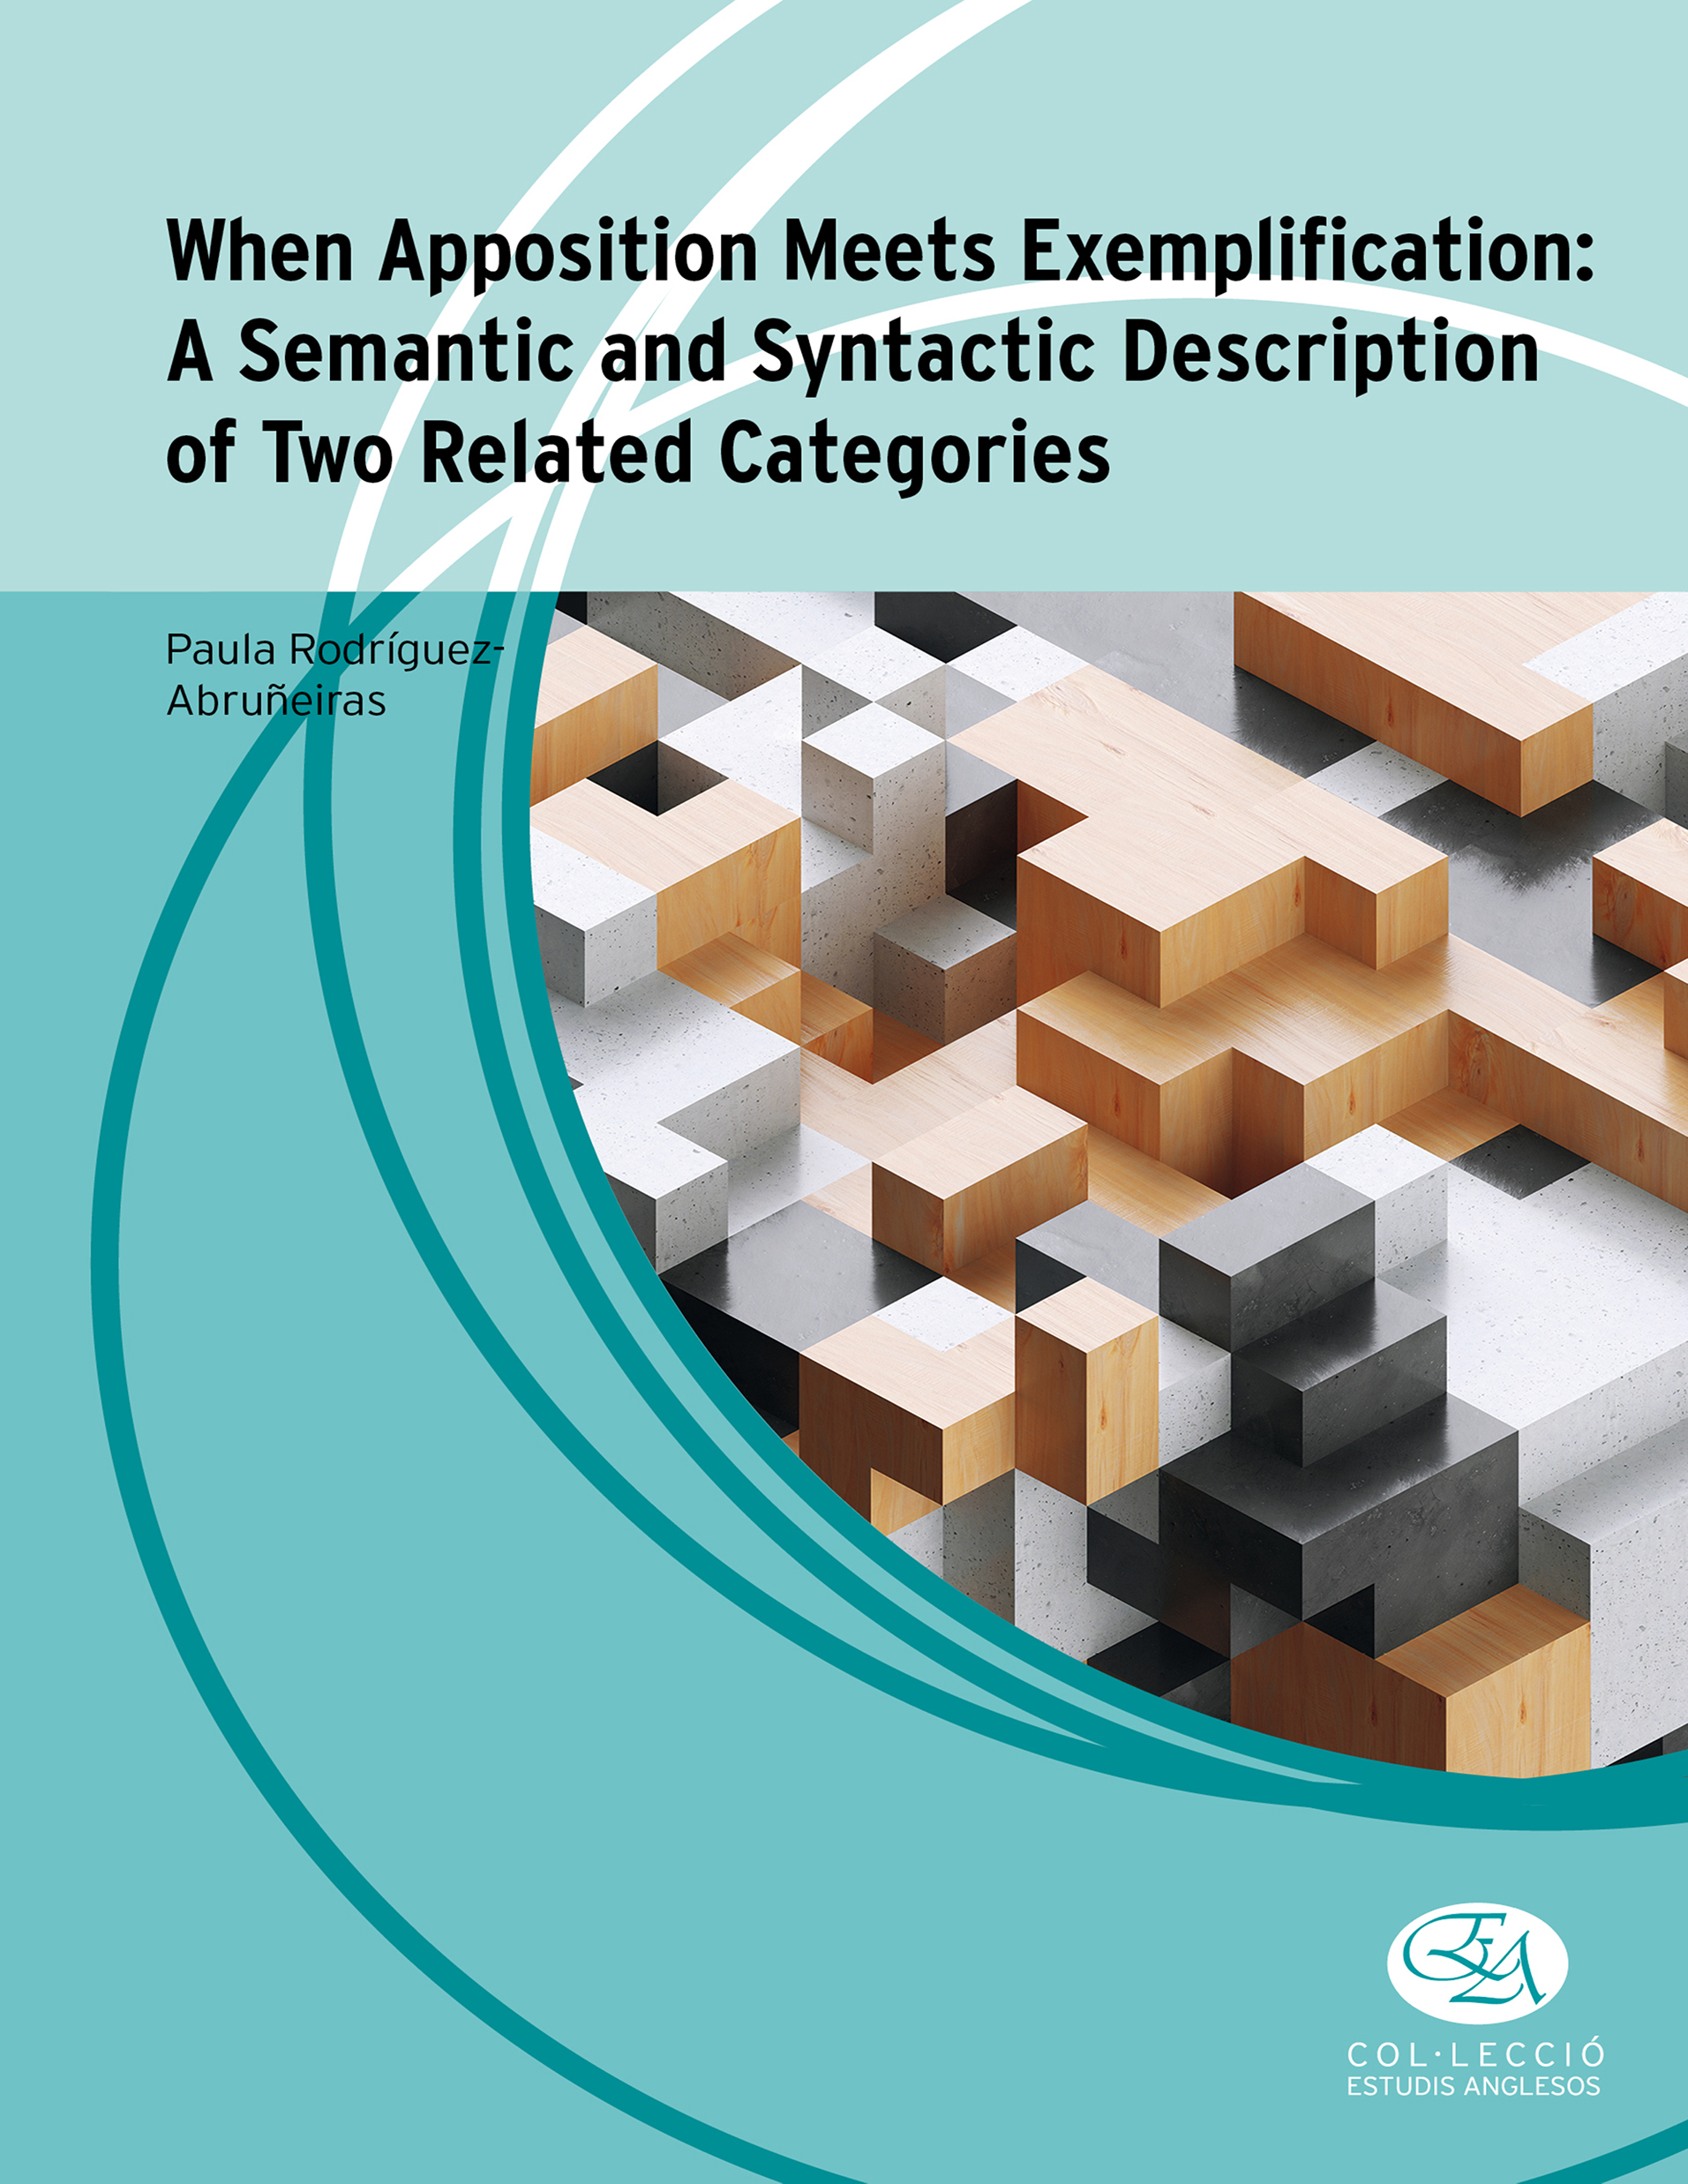 When Apposition Meets Exemplification: A Semantic and Syntactic Description of Two Related Categories